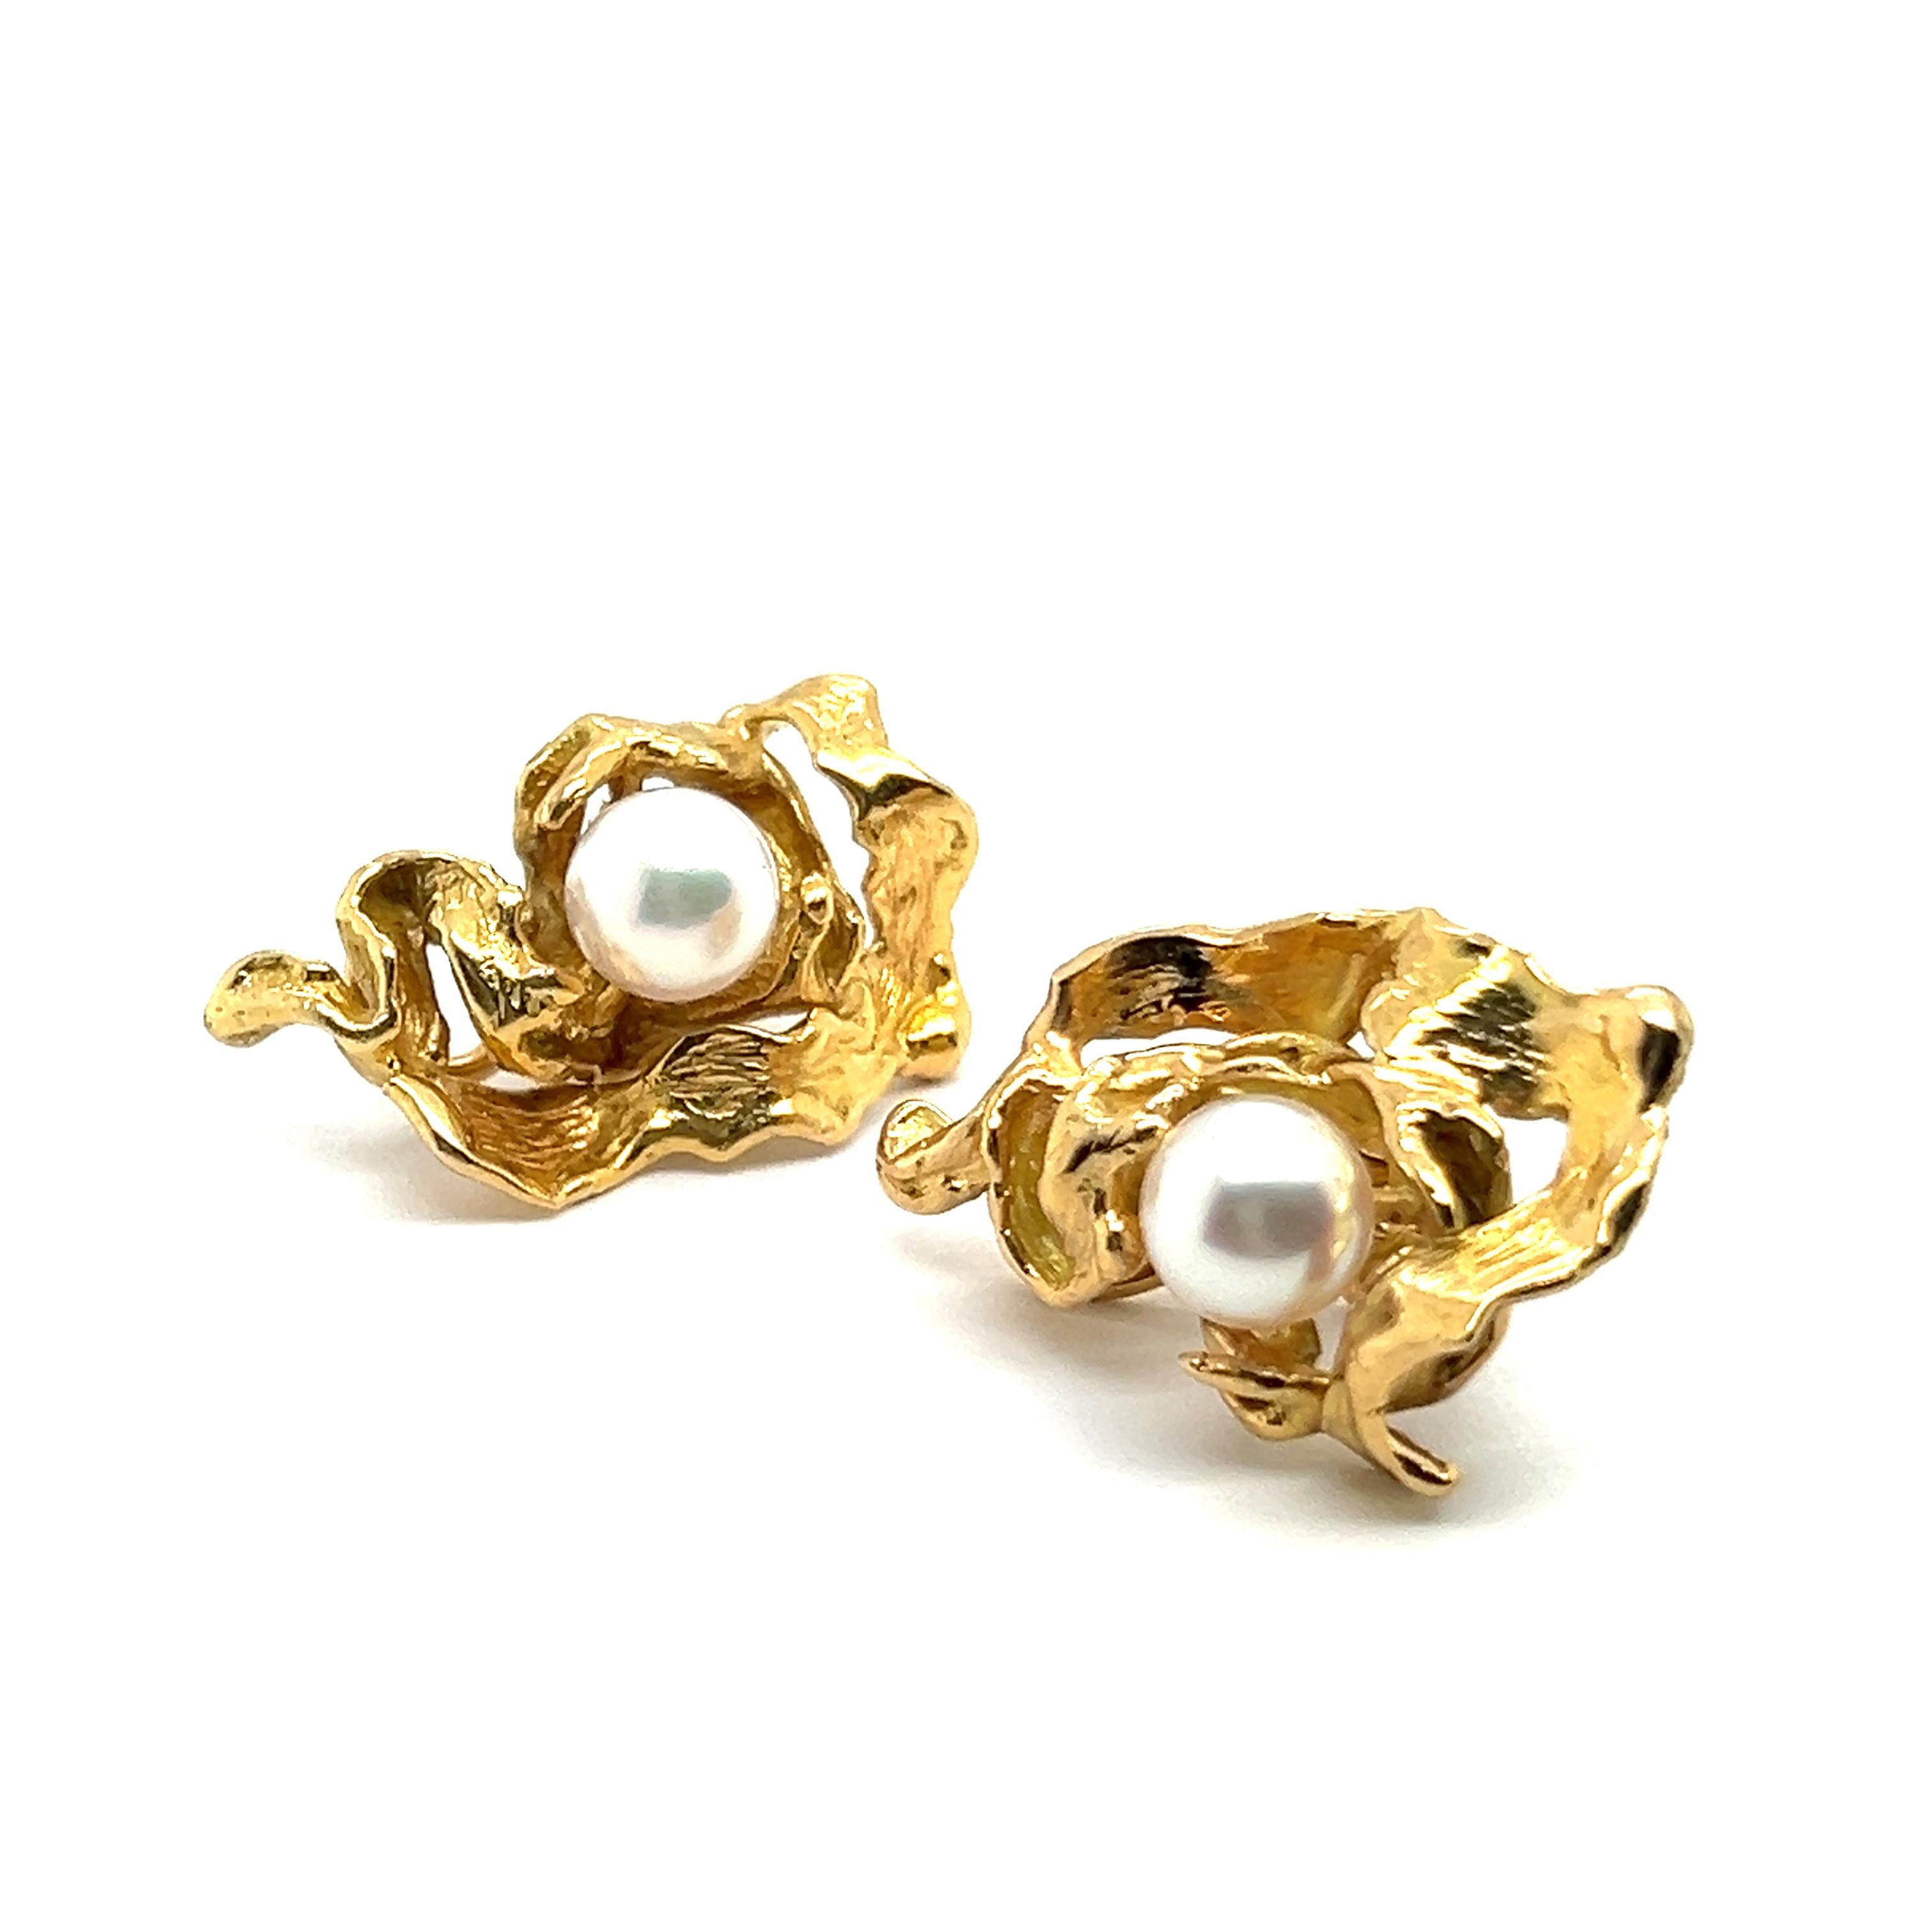 Sculptural Earrings with Akoya Pearls in 18 Karat Yellow Gold by Gilbert Albert

Crafted by the visionary Gilbert Albert, these sculptural earrings embody elegance and innovation. Albert's legacy as a pioneering jewelry designer spans decades.